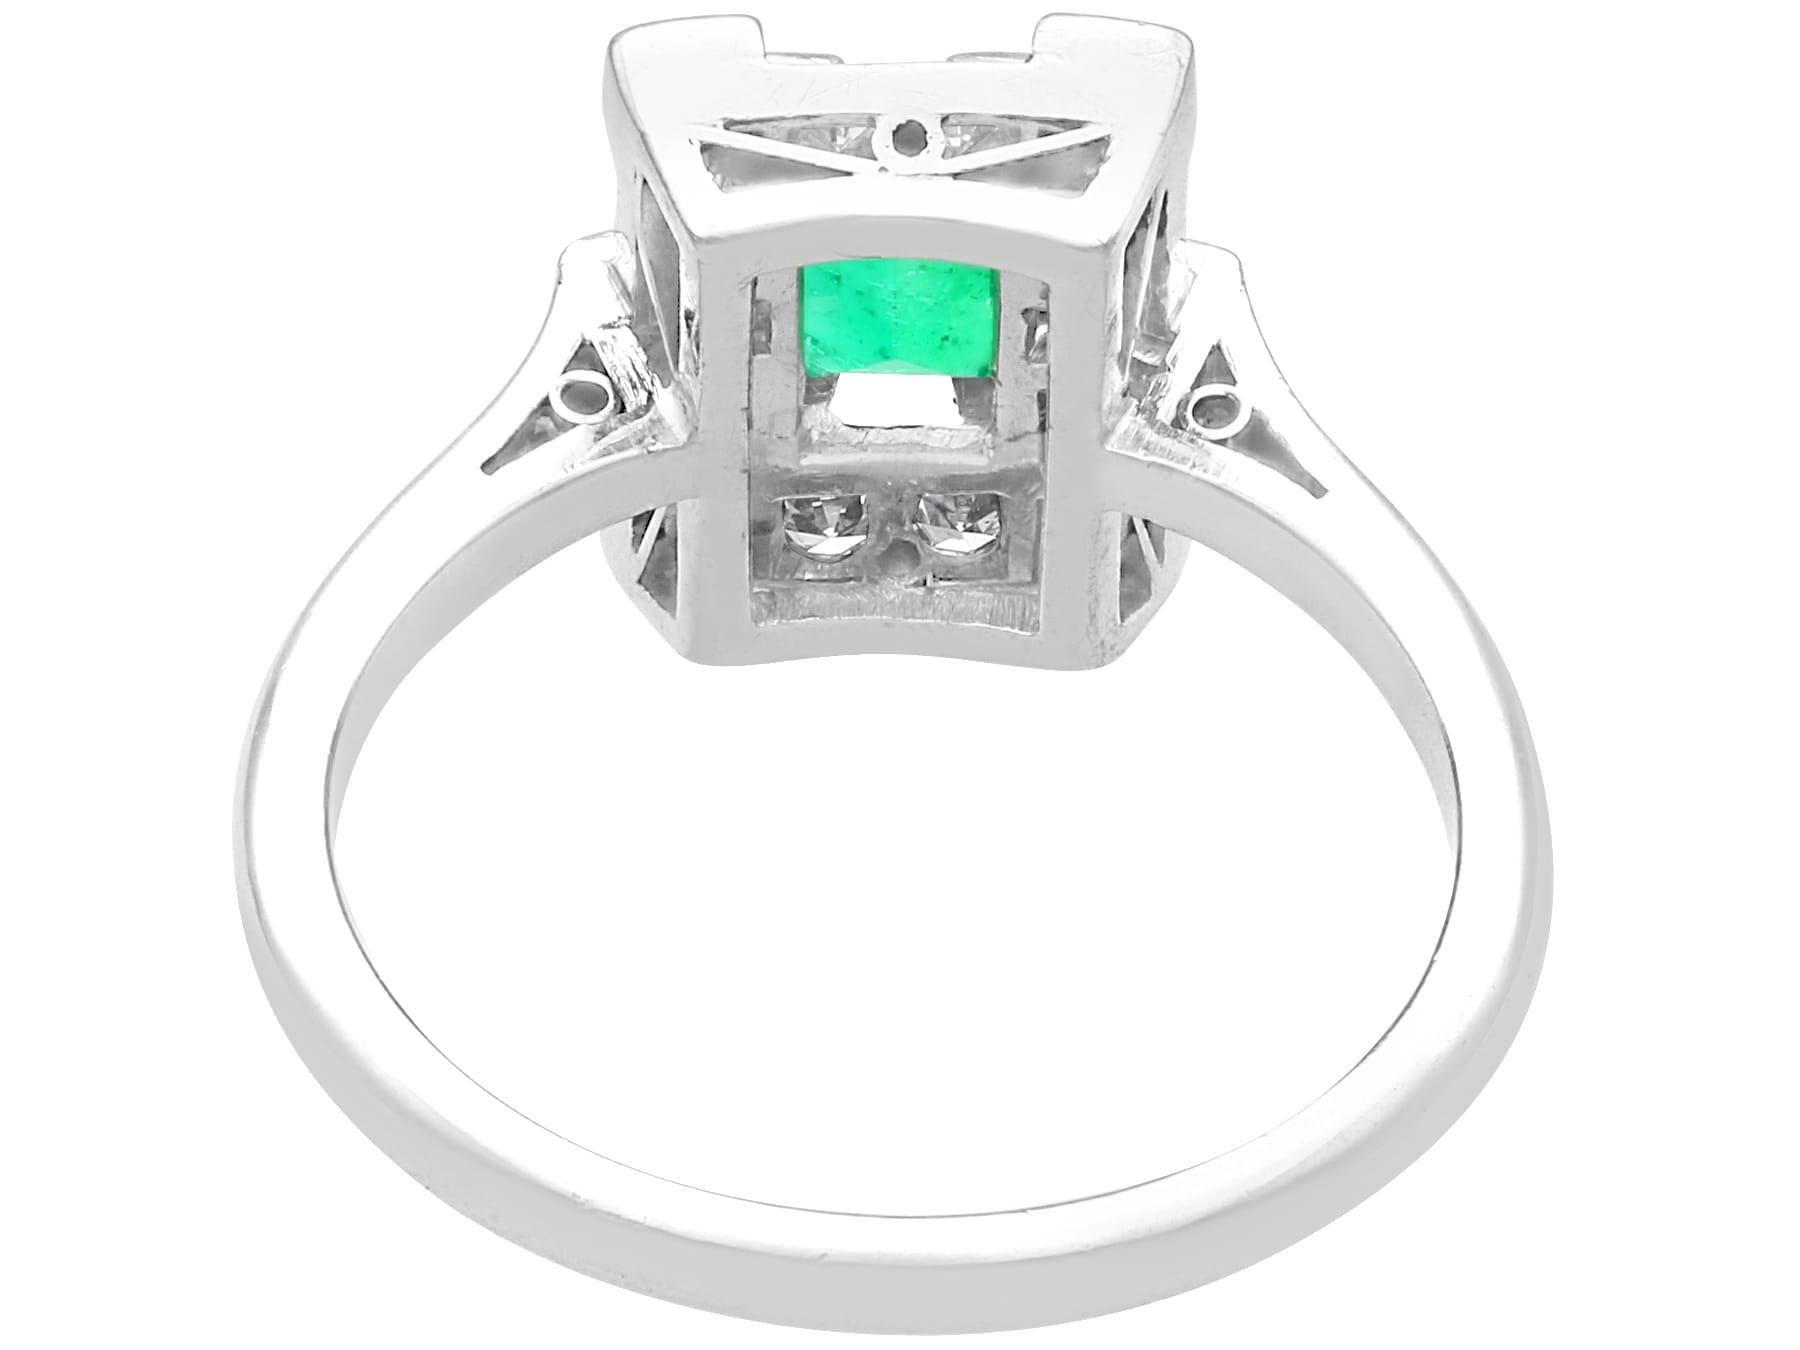 Antique 0.50 Carat Emerald and 0.33 Carat Diamond 18k White Gold Dress Ring In Excellent Condition For Sale In Jesmond, Newcastle Upon Tyne